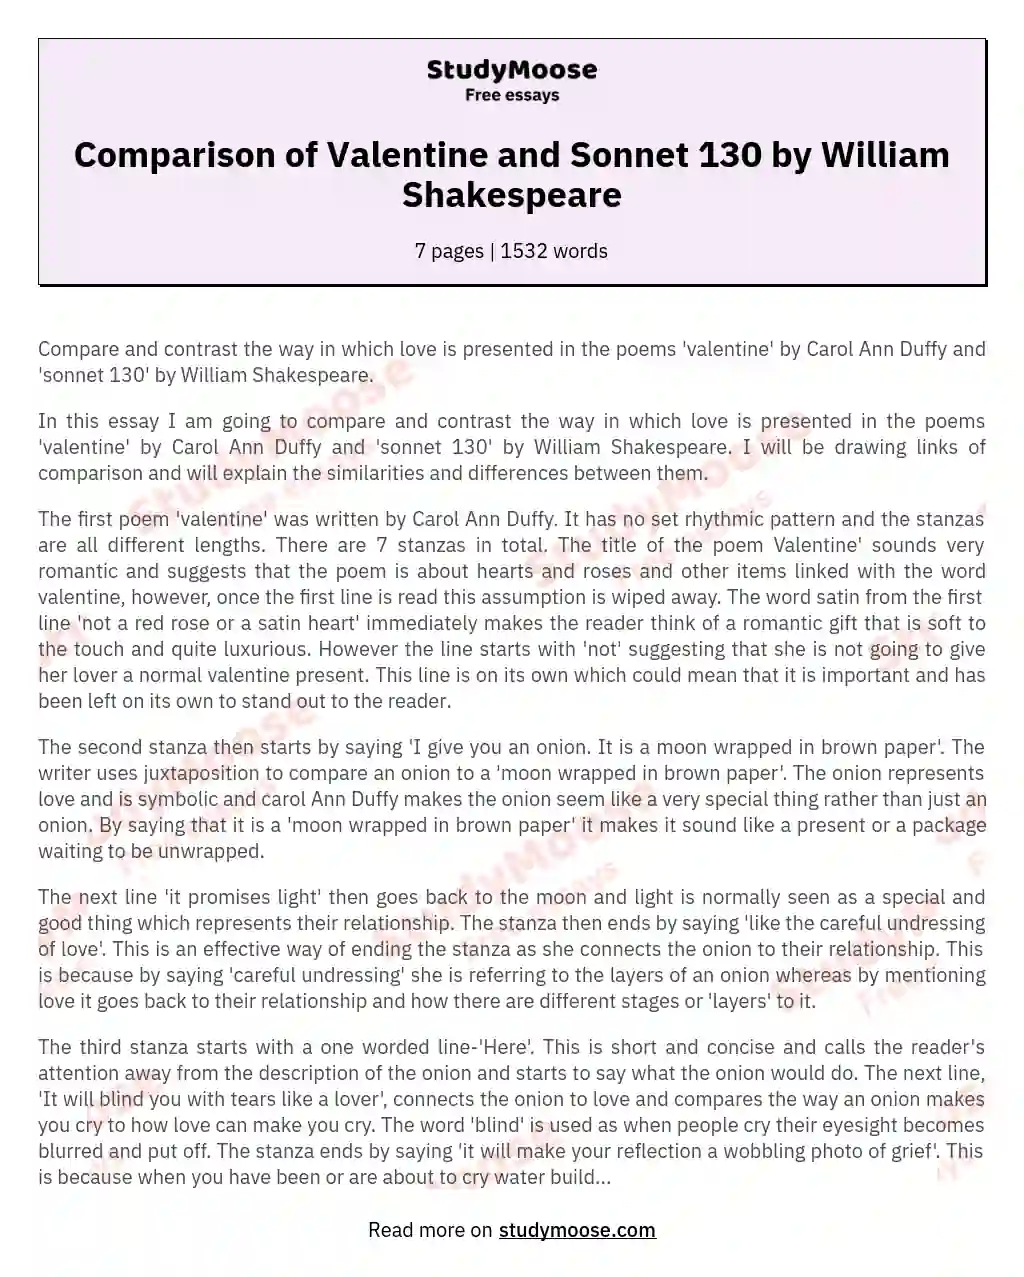 Comparison of Valentine and Sonnet 130 by William Shakespeare essay